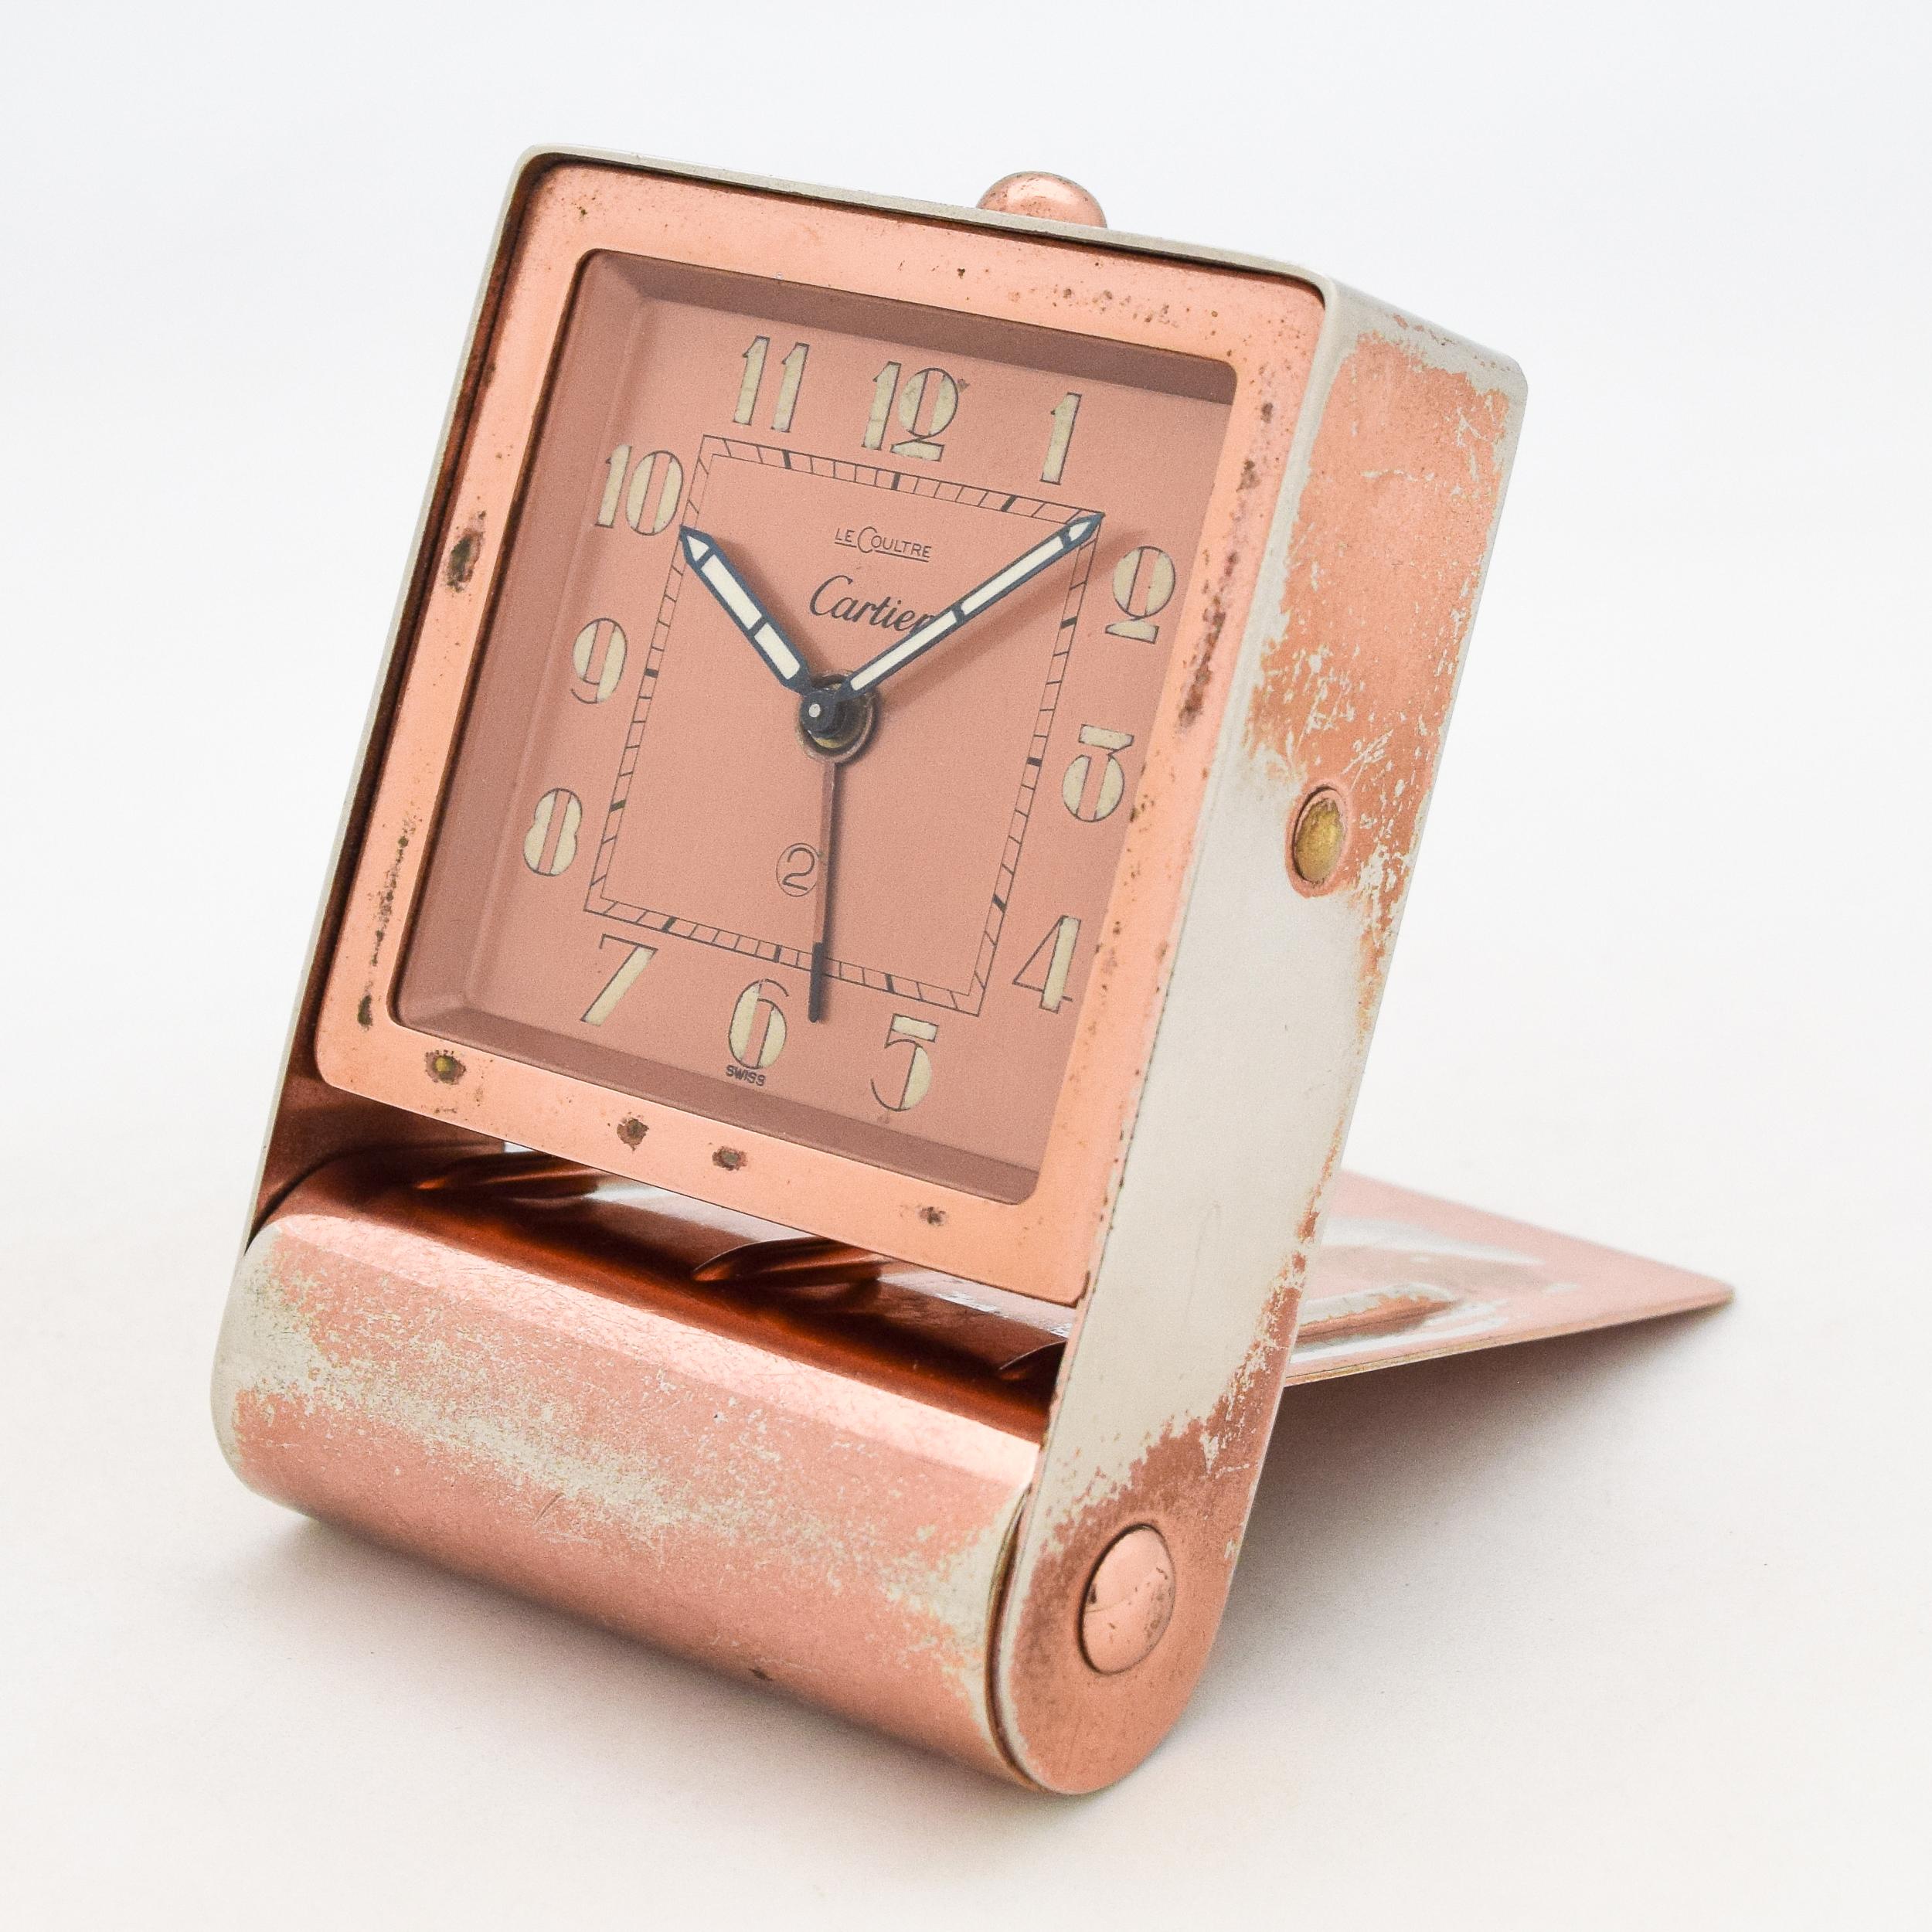 1940's Vintage Cartier Travel Alarm Clock Copper Plated with Movement Made By Le Coultre with Original Salmon/Copper Color Dial with Original Black Leather Carrying Case. Triple Signed Le Coultre. 58mm x 58mm lug to lug (2.28 in. x 2.28 in.). 7